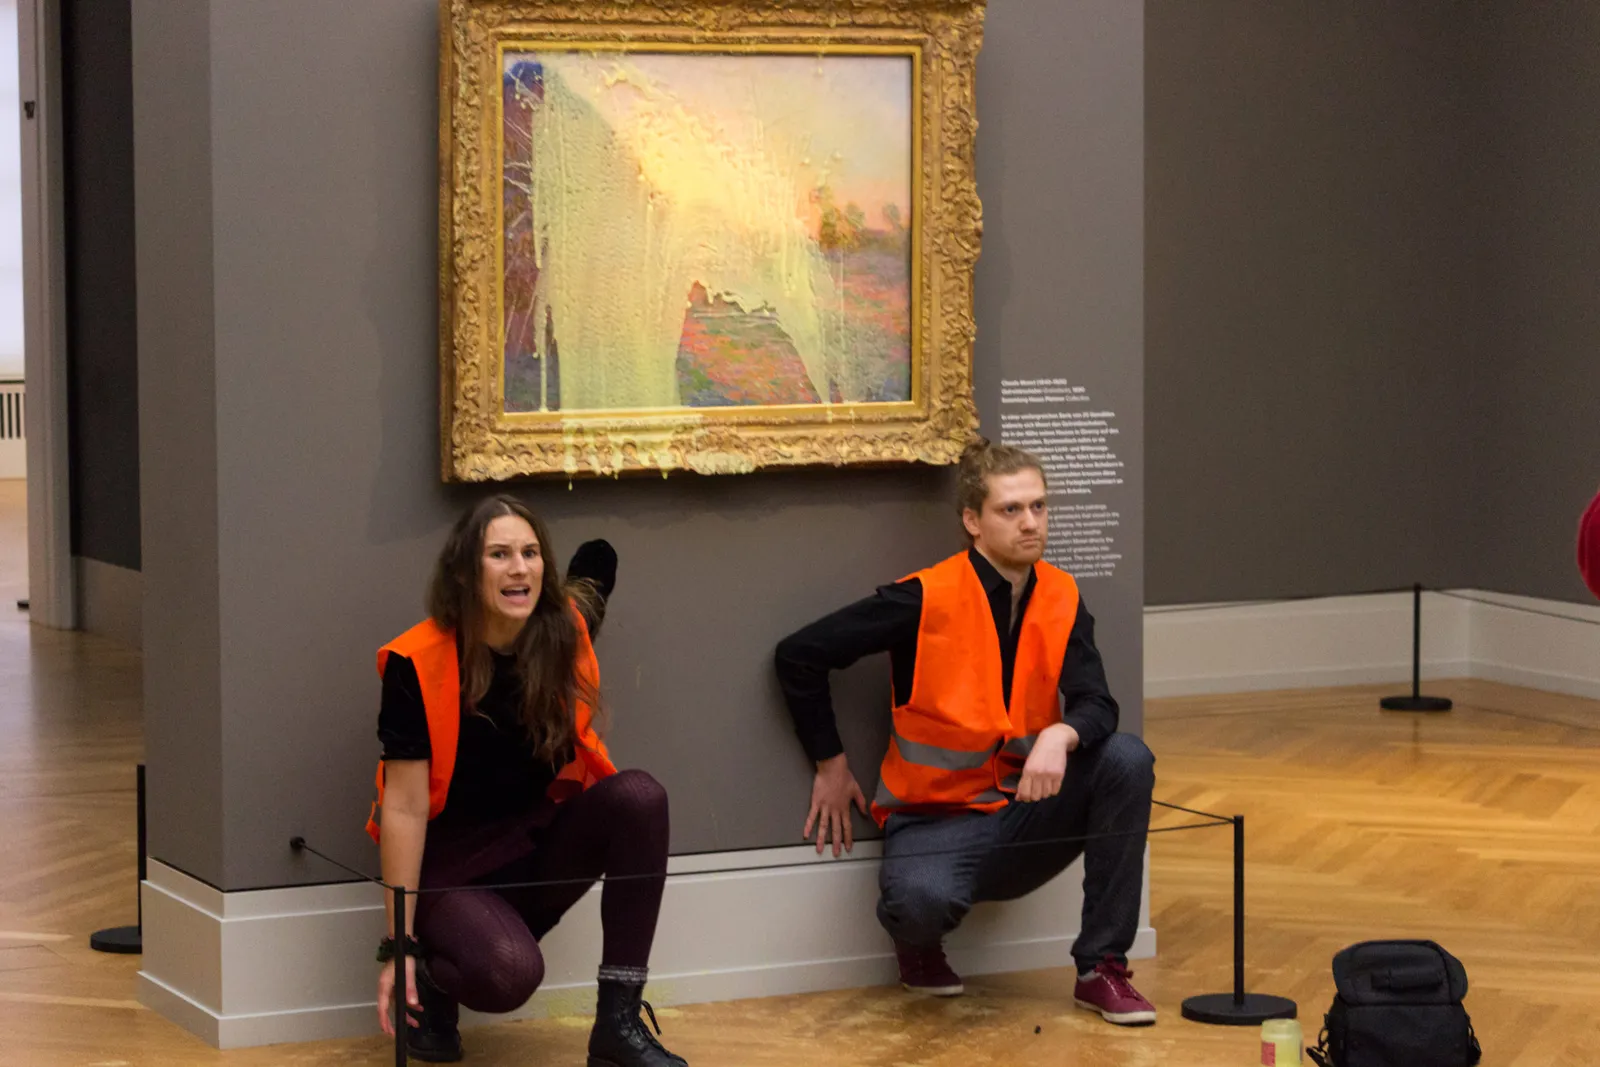 Climate Activists Keep Gluing Themselves to Artwork in Museums